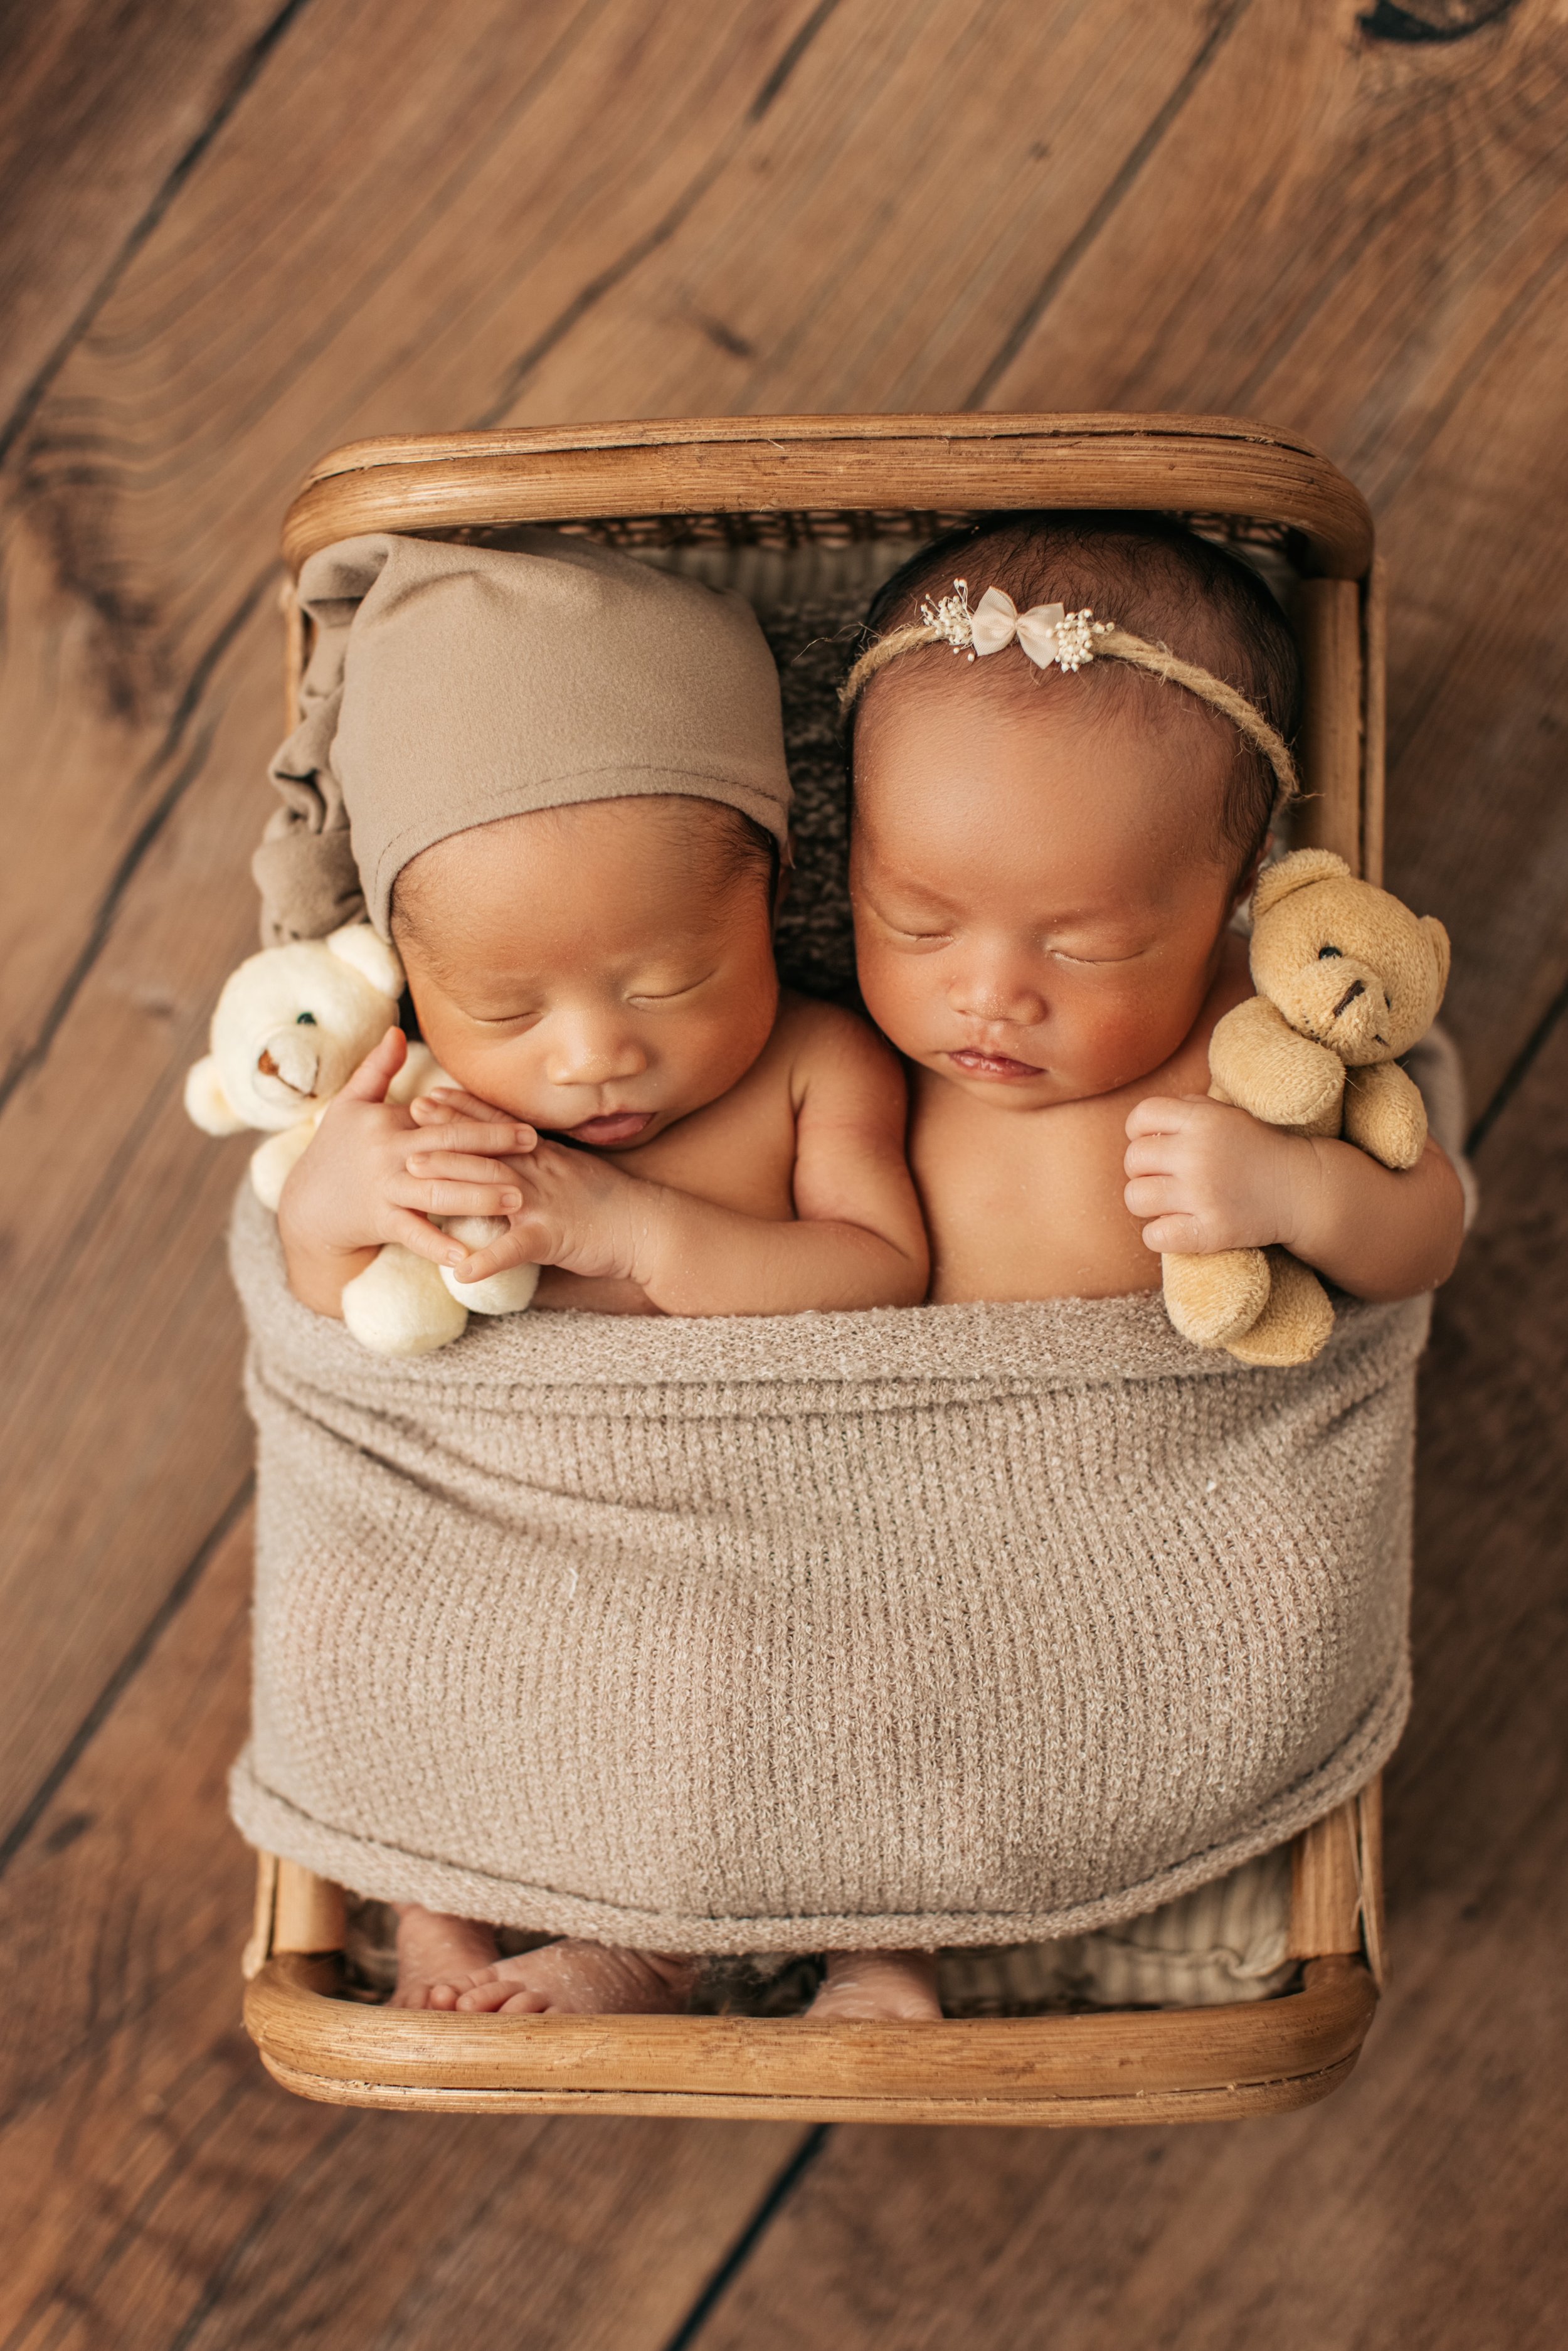 Double The Love - Twin Newborn Session! — Jacksonville Fl Photography